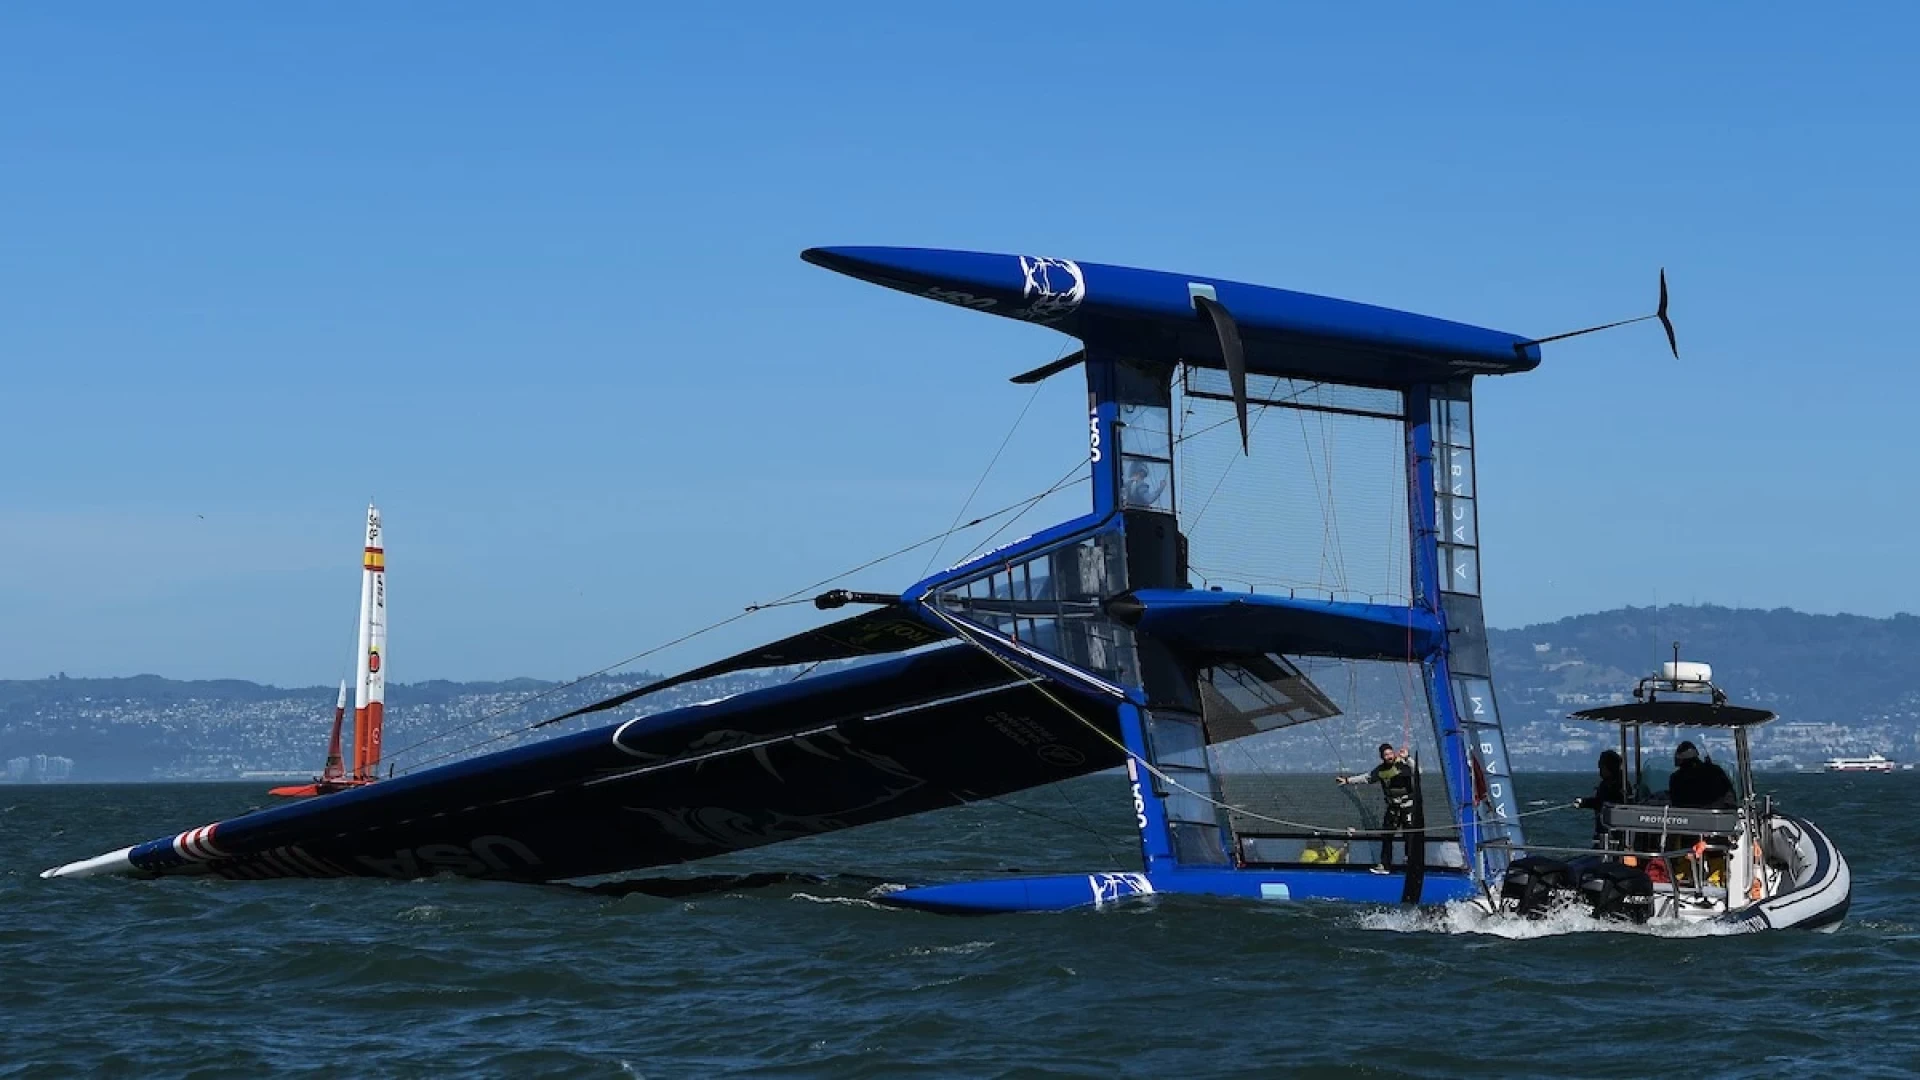 The United States SailGP Team capsized today on San Francisco